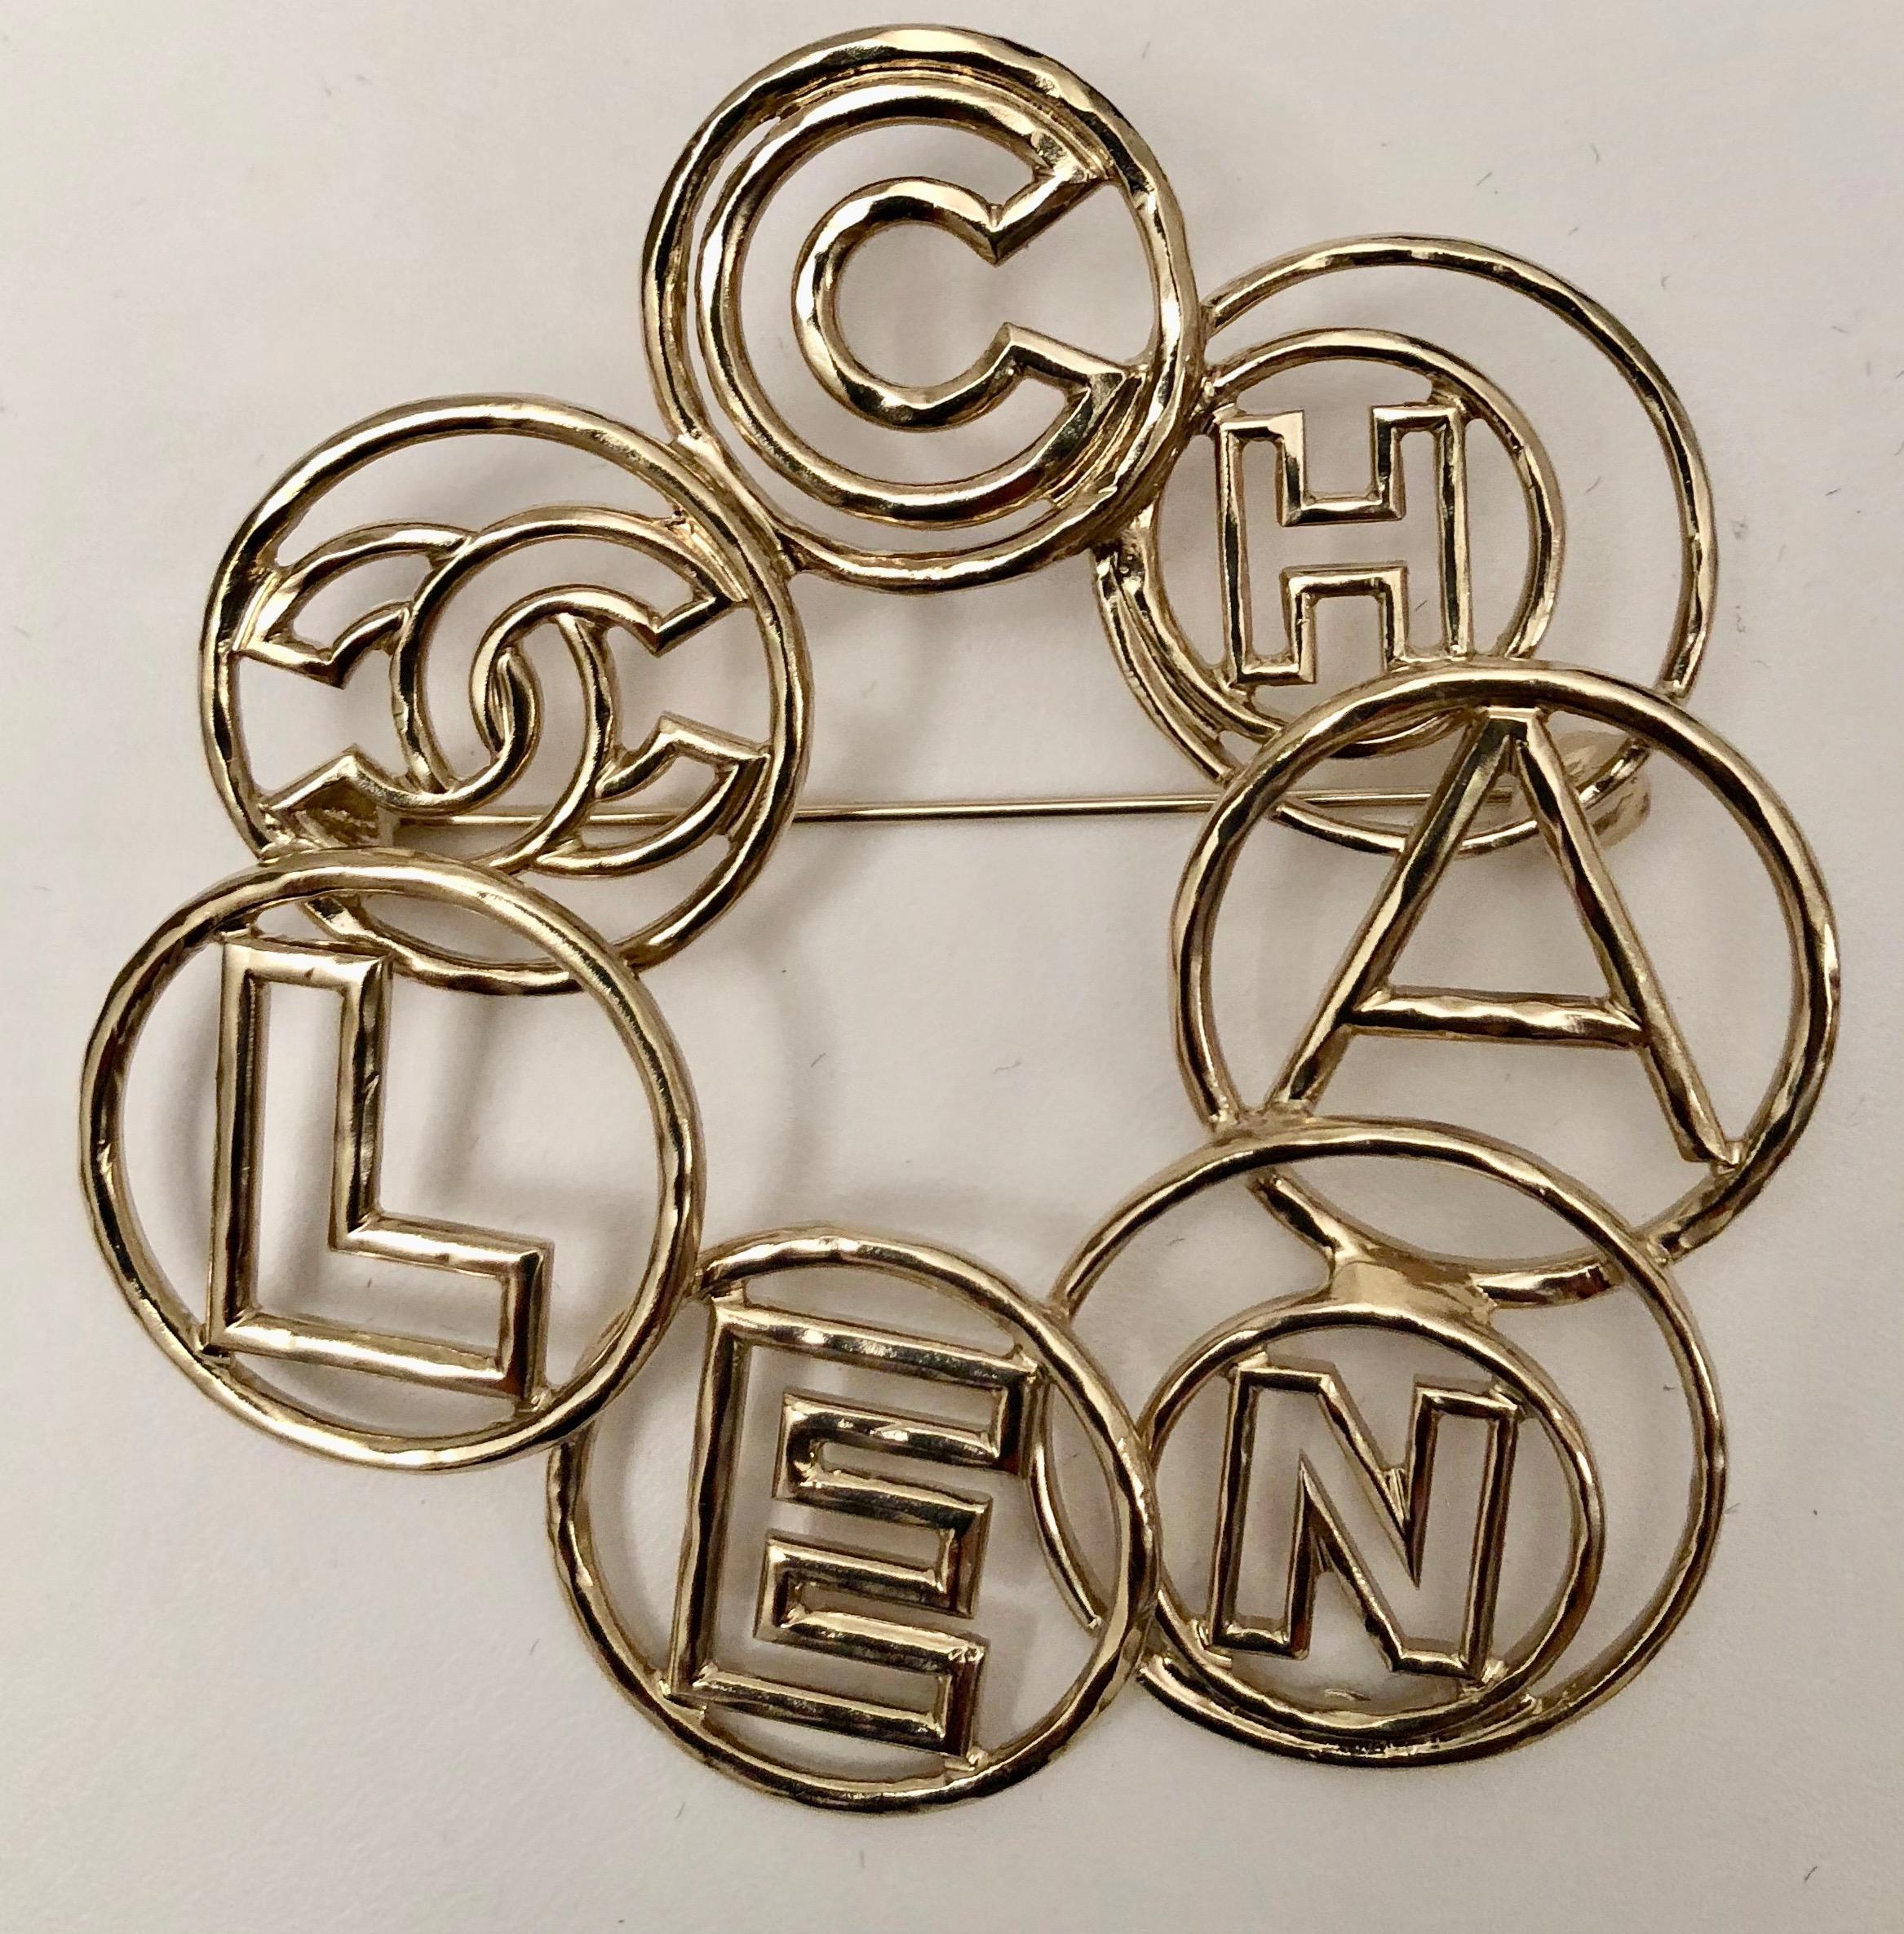 Women's or Men's New Chanel Brooch/Pin Gold Tone